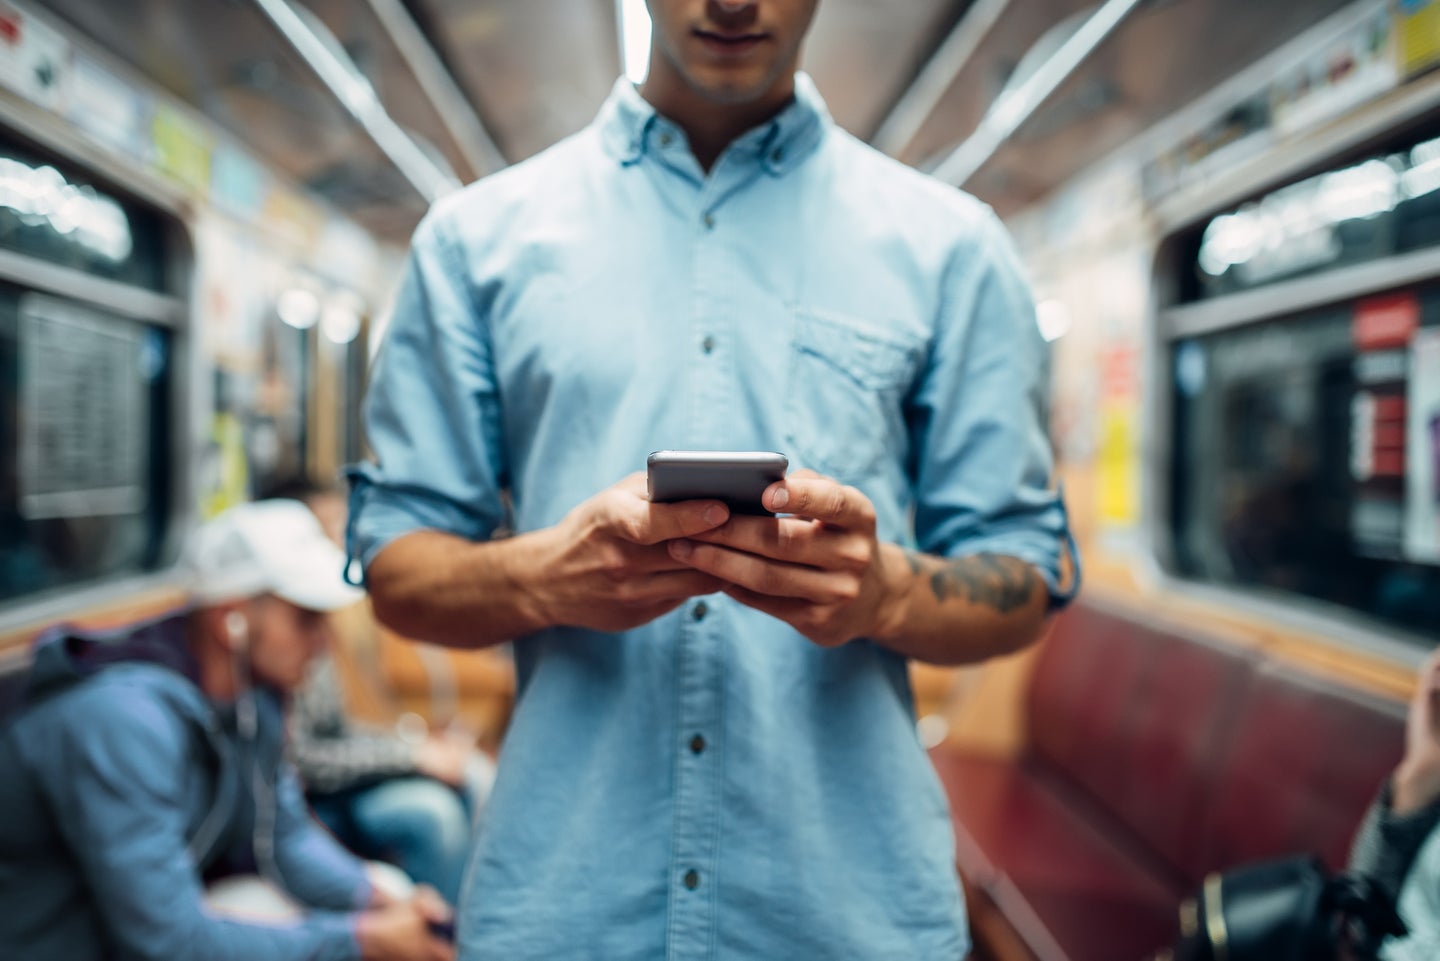 a man holds a phone in his hands on the subway